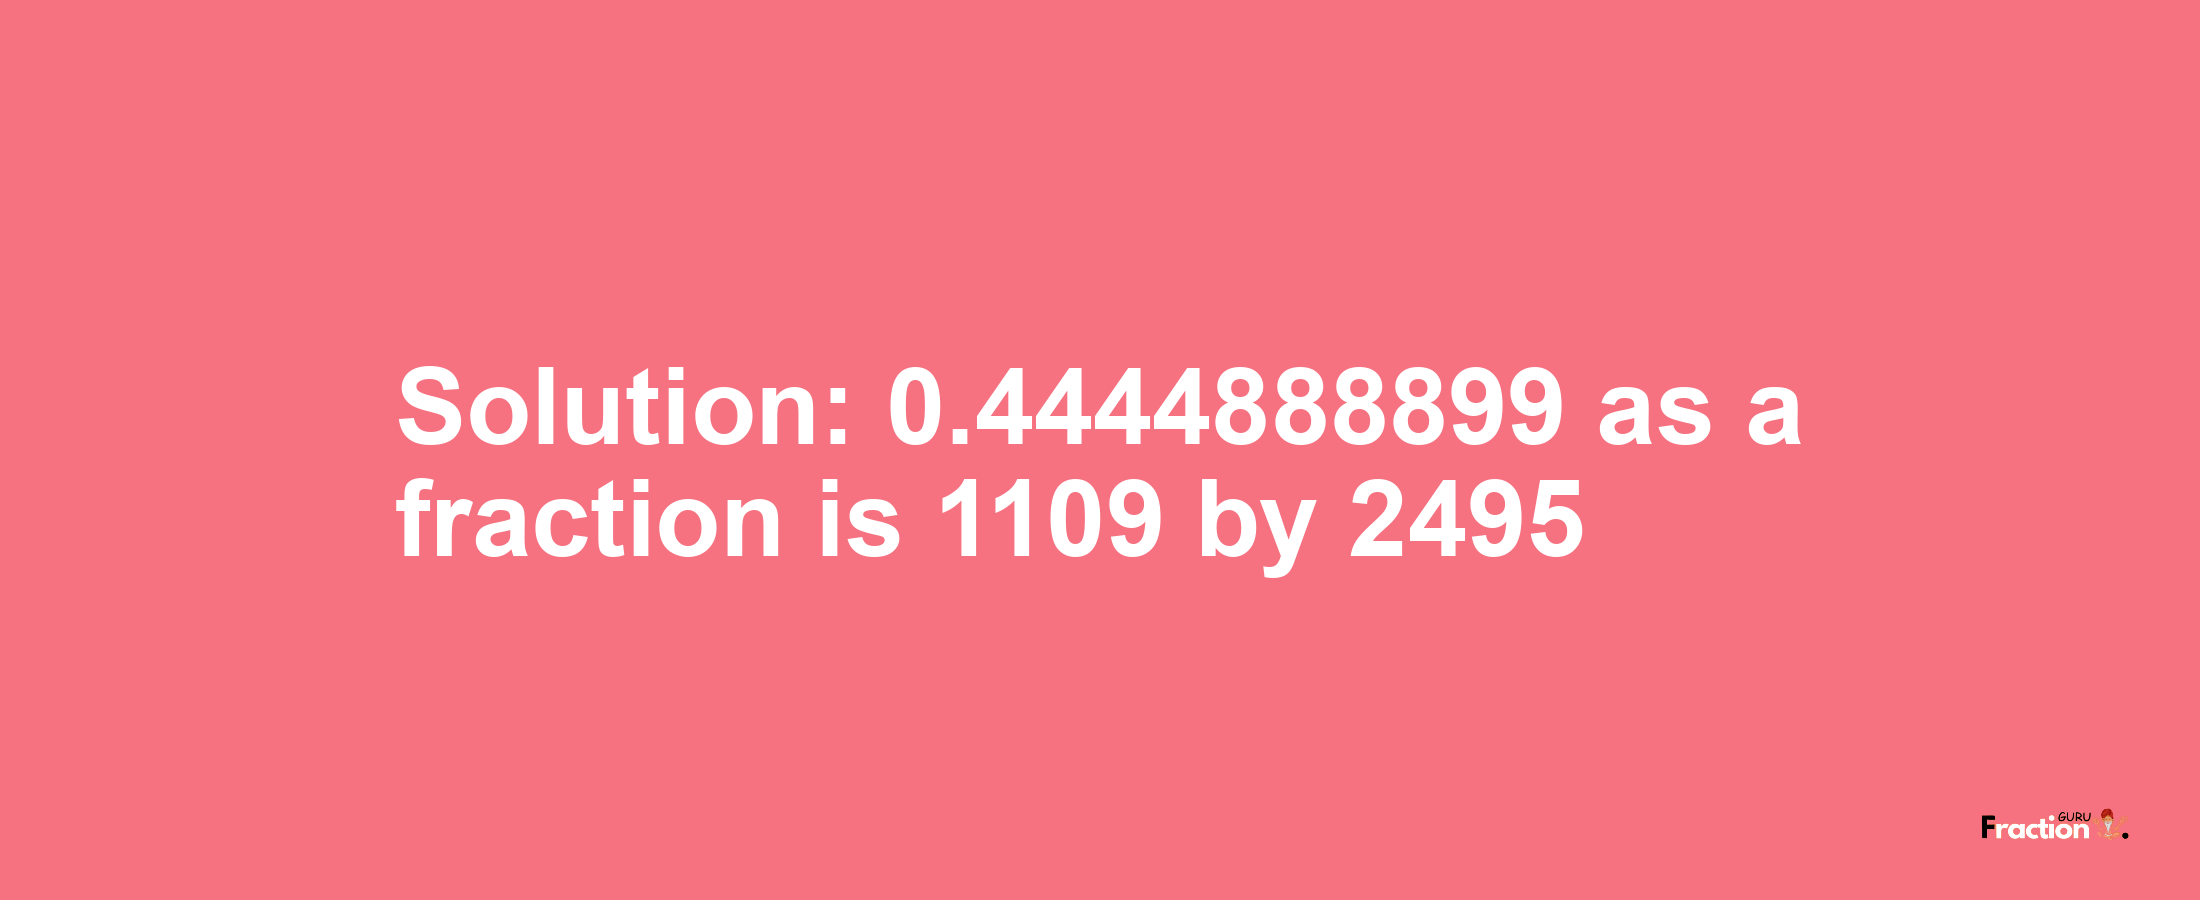 Solution:0.4444888899 as a fraction is 1109/2495